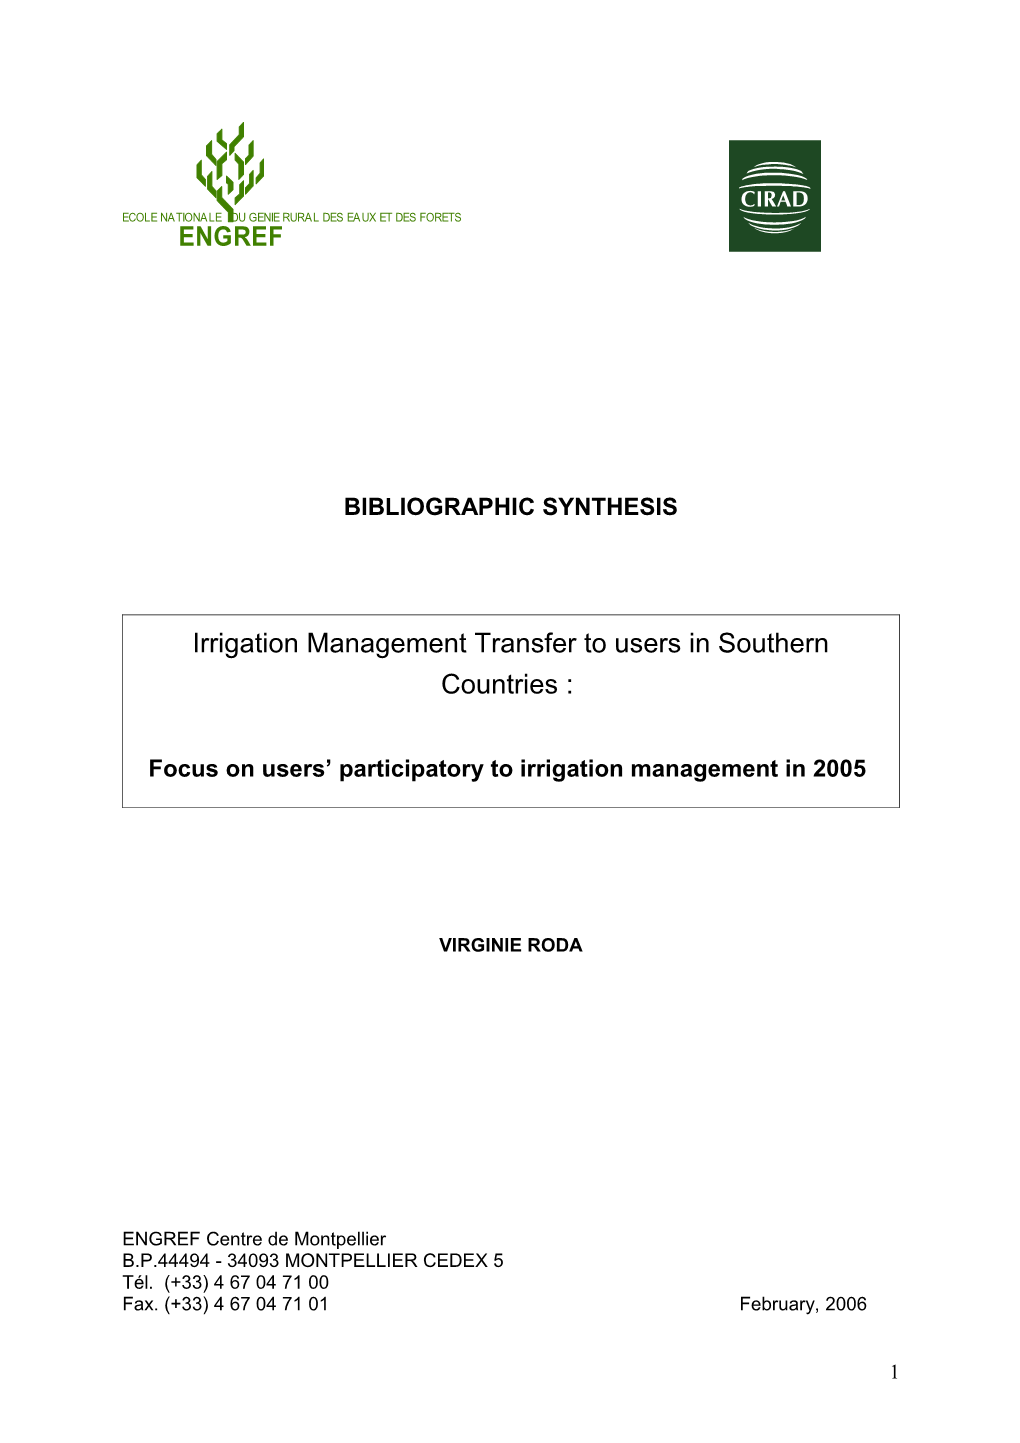 Irrigation Management Transfer to Users in Southern Countries